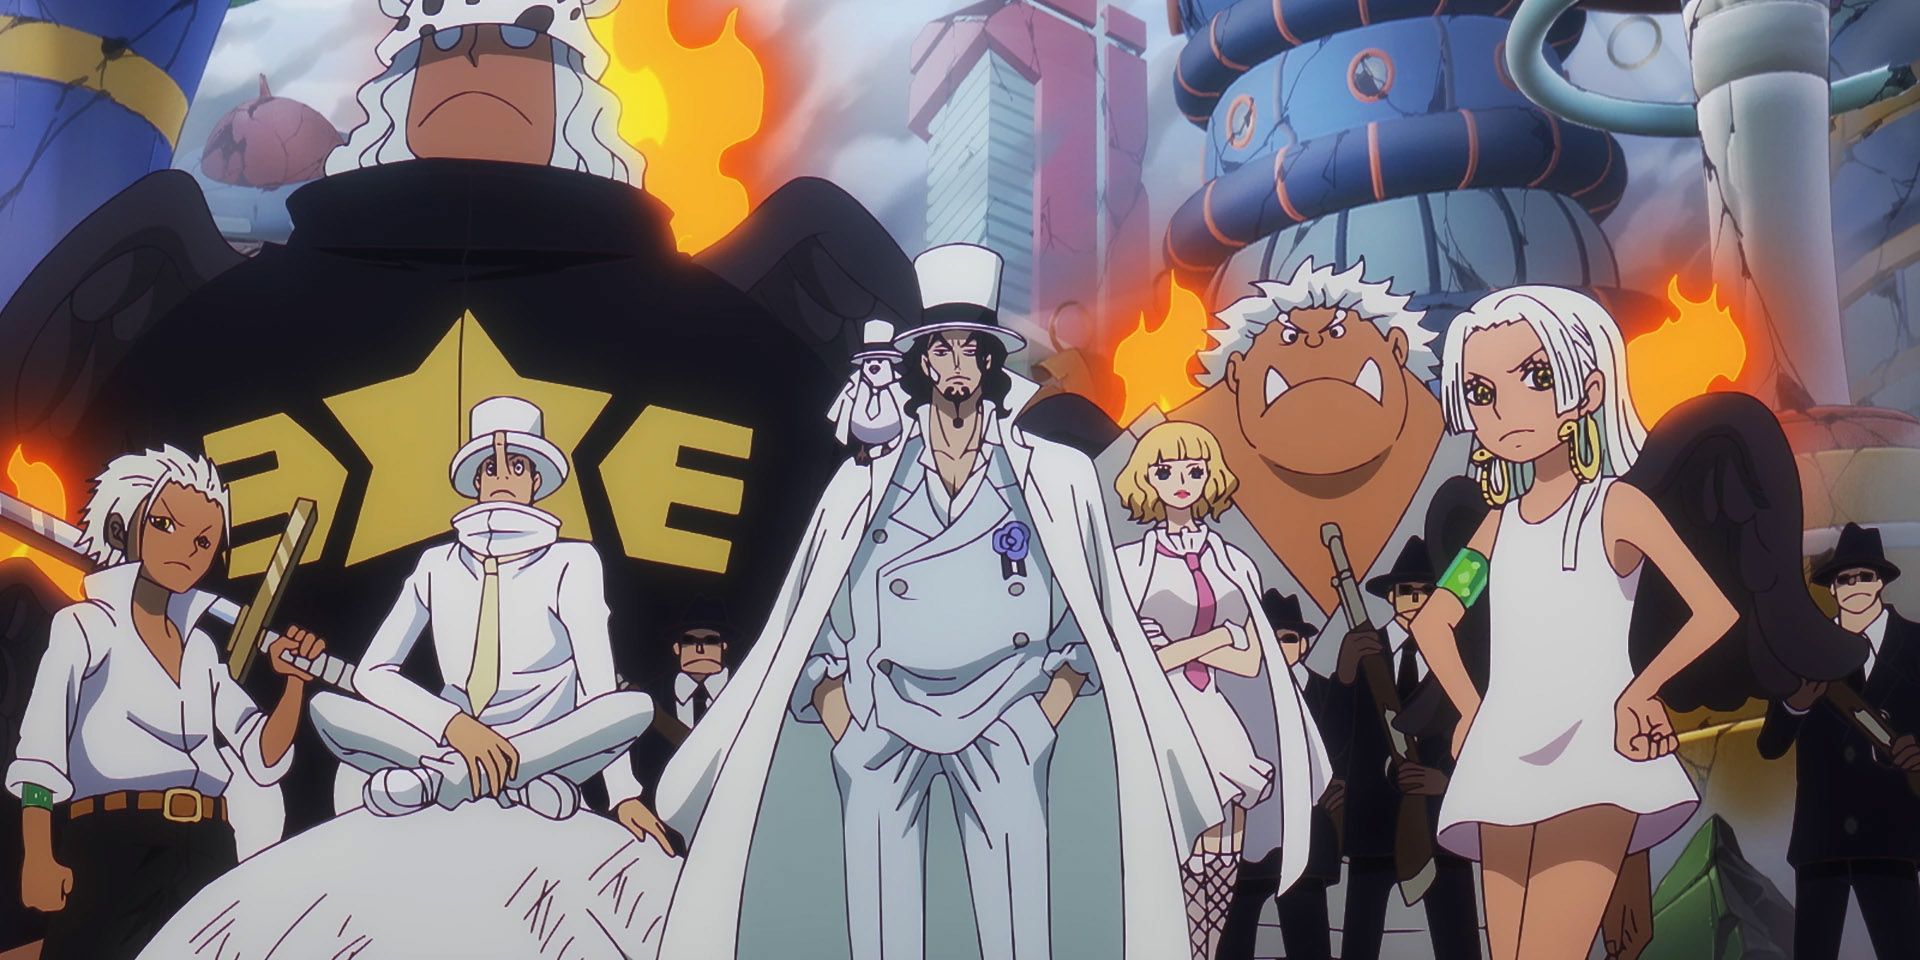 Lucci takes control of the Seraphim in One Piece